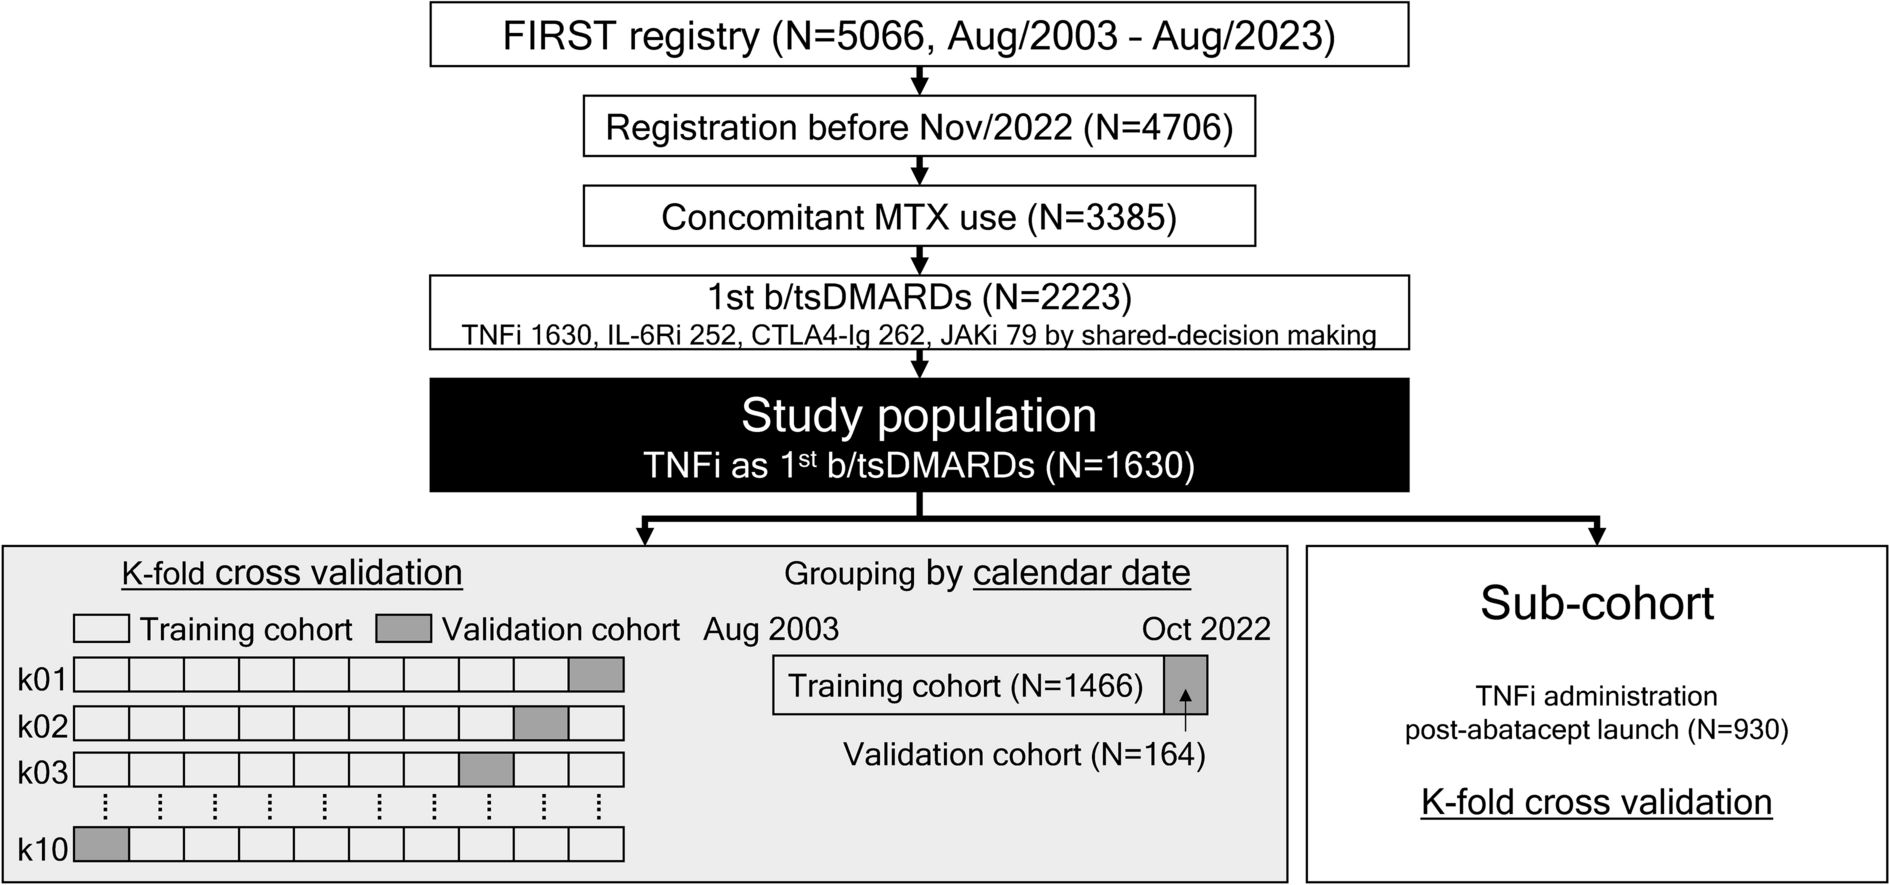 A Machine Learning Approach for Prediction of CDAI Remission with TNF Inhibitors: A Concept of Precision Medicine from the FIRST Registry